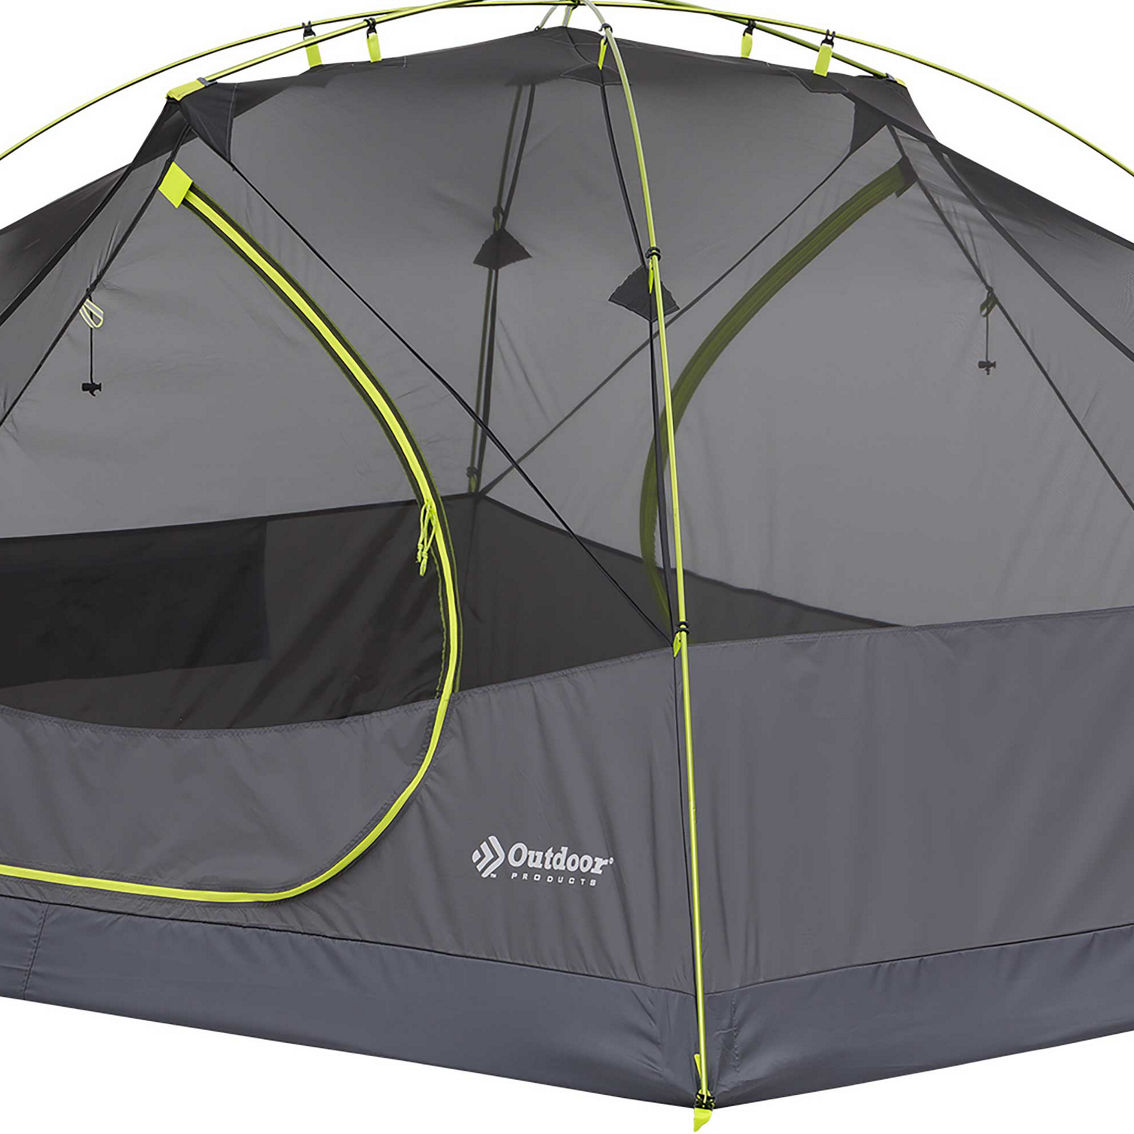 Outdoor Products 4P Backpacking Tent w/ 2 Vestibules - Image 3 of 9